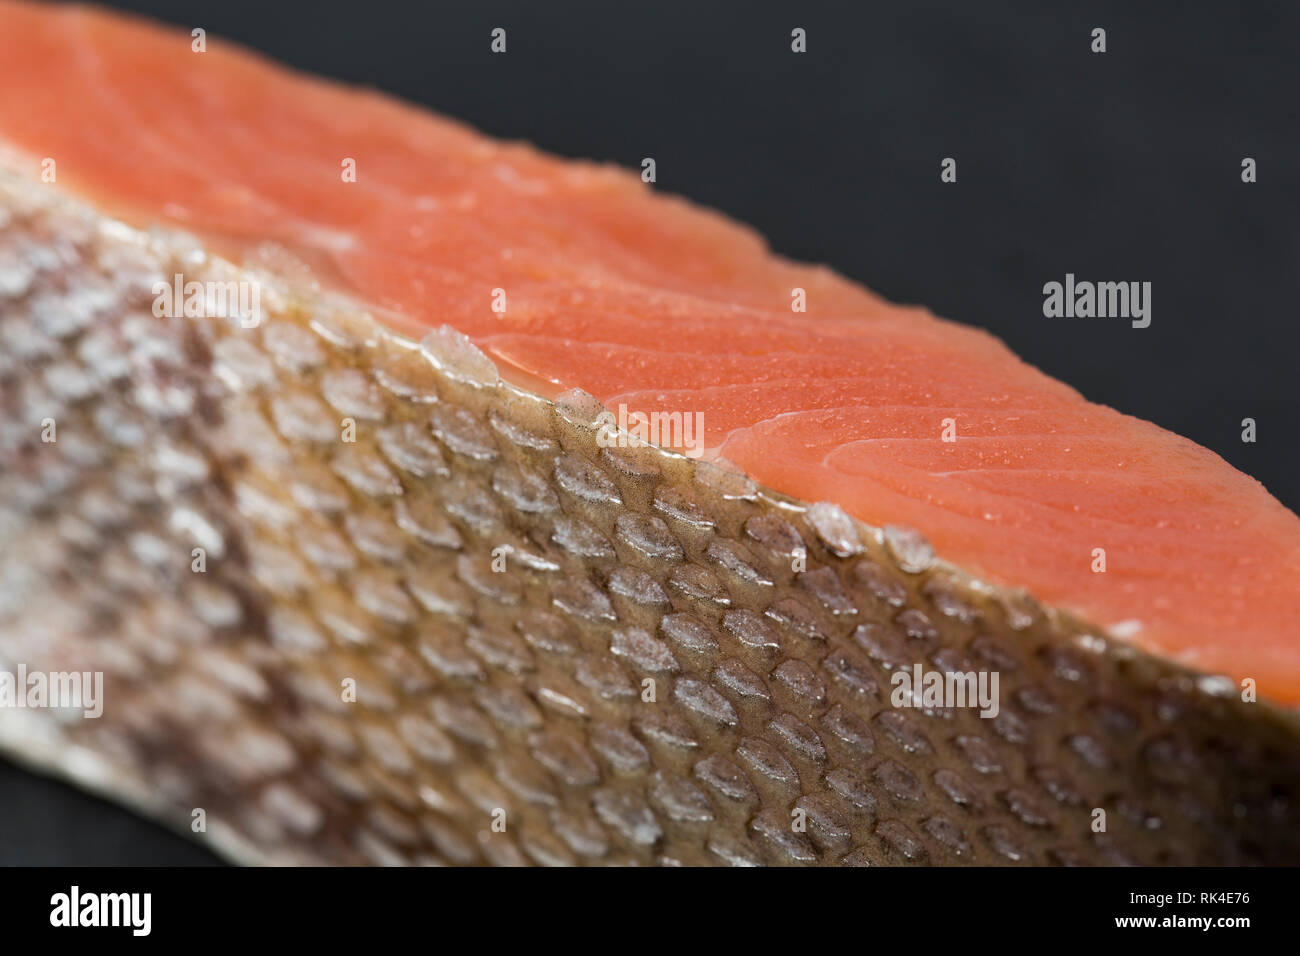 Raw Pink Salmon Steak, Red Fish, Chum or Trout Fillet Stock Image - Image  of meat, food: 143651169